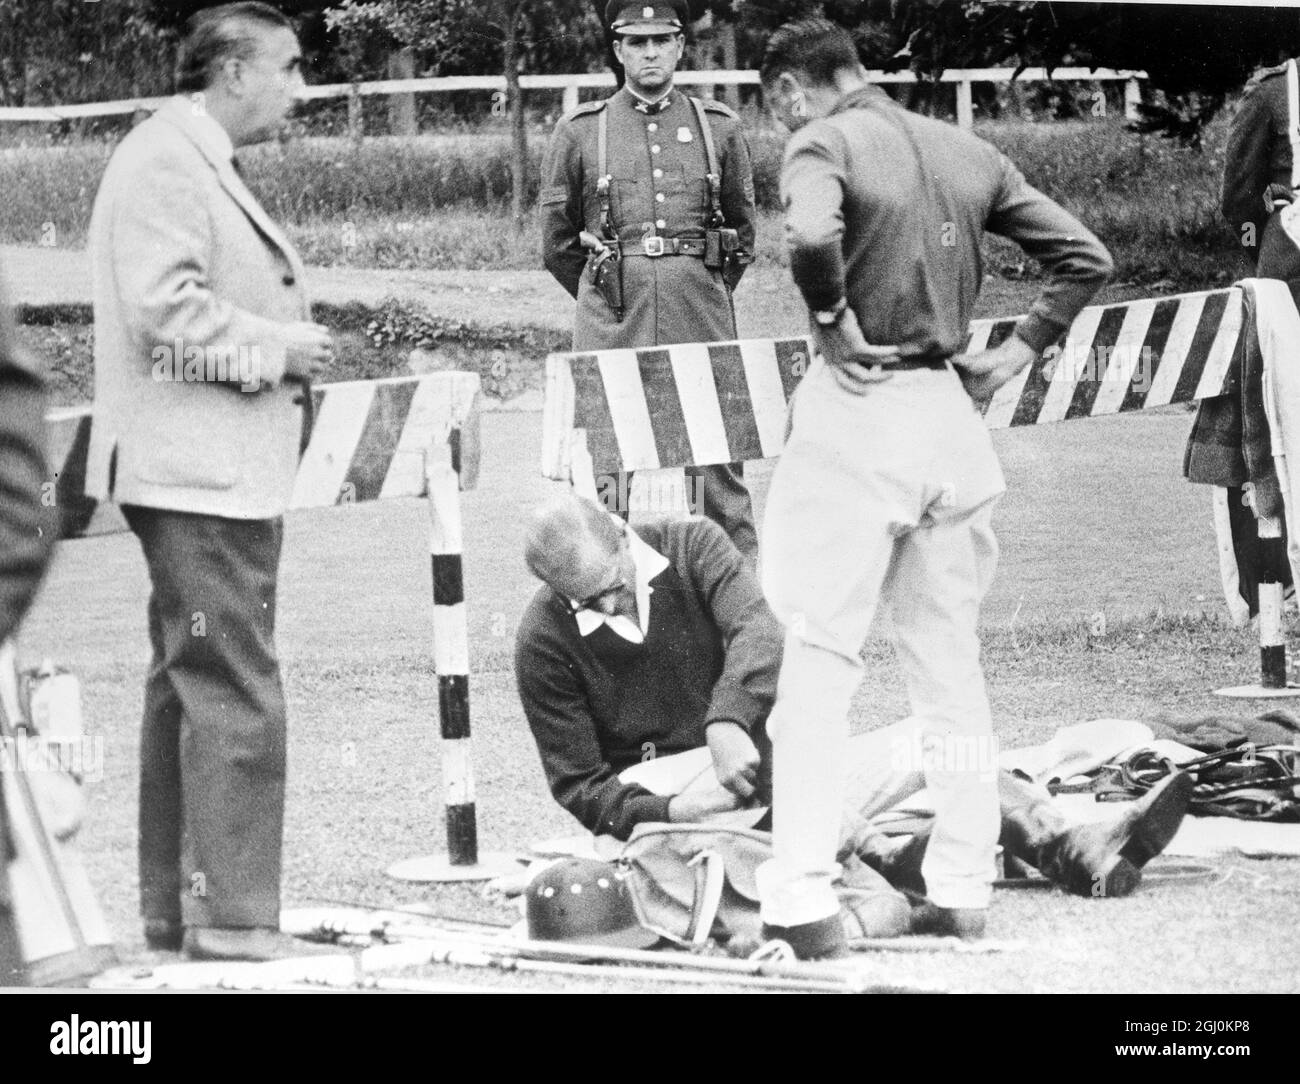 San Diego, Chile: H.R.H. Duke Of Edinburgh (seated on ground) puts on his polo kit here recently as he prepares to play a friendly game of his favourite sport, Polo. With him is another unidentified player with a South African journalist at left and policemen looking on behind the barriers. 12 March 1962 Stock Photo